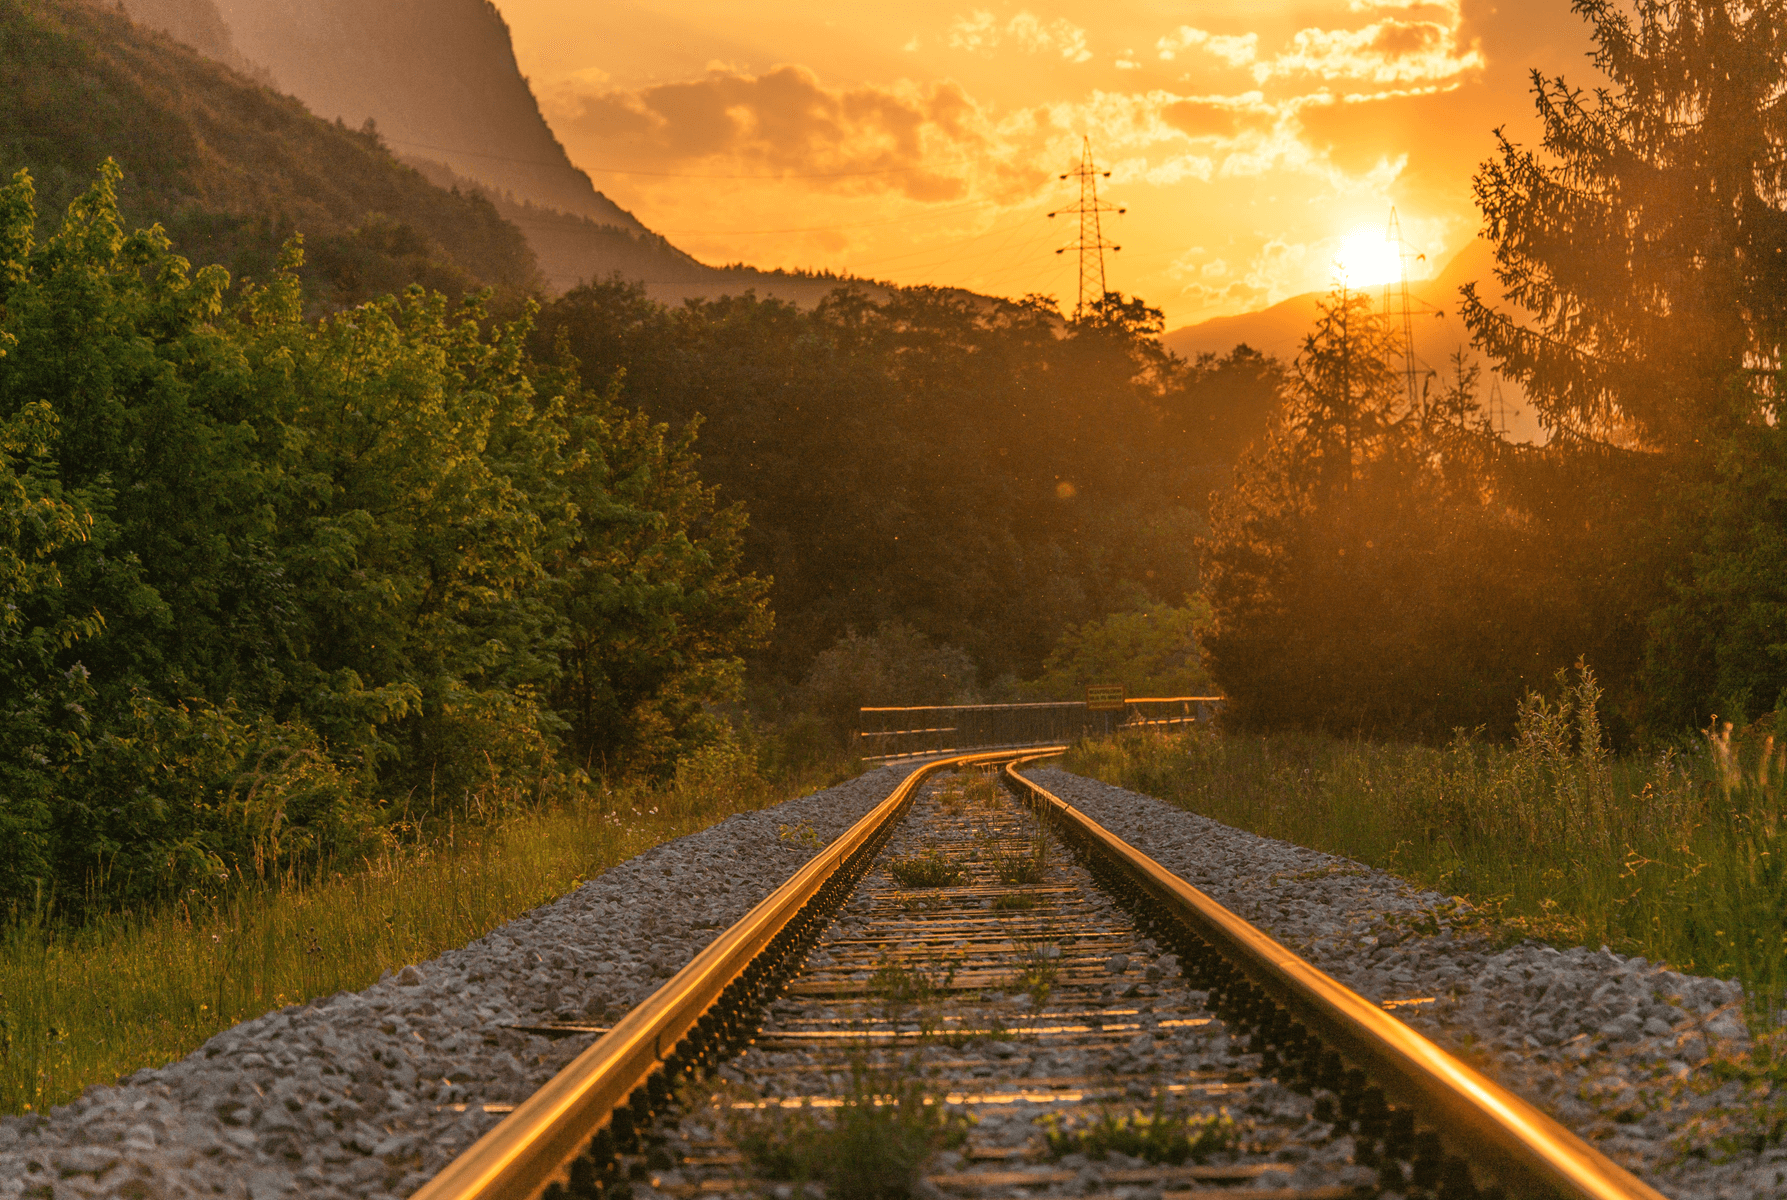 Image of a train track in a rural area at sunset